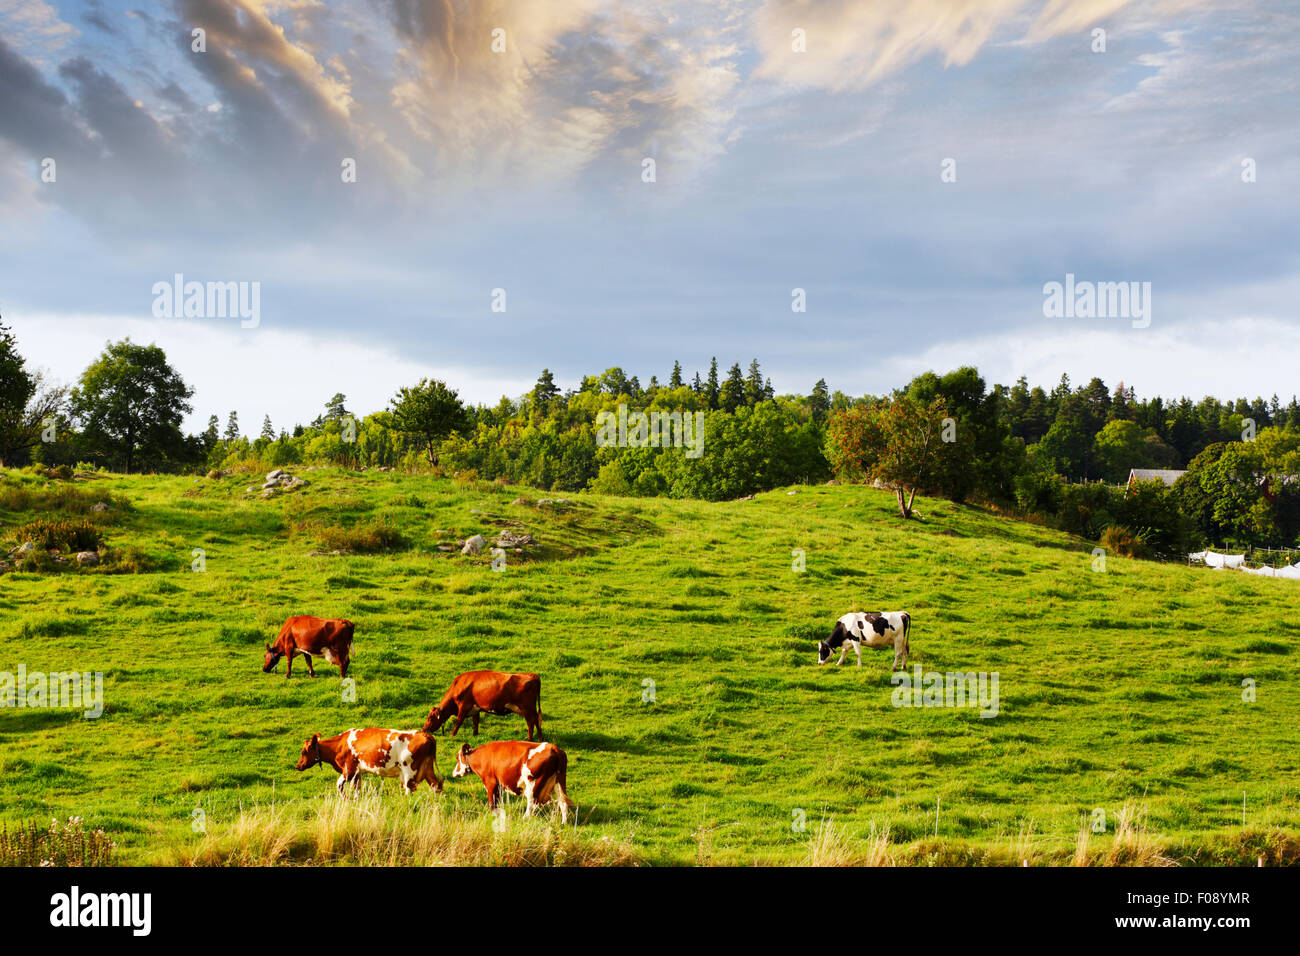 grazing cows, cattle in old rural landscape culture Stock Photo